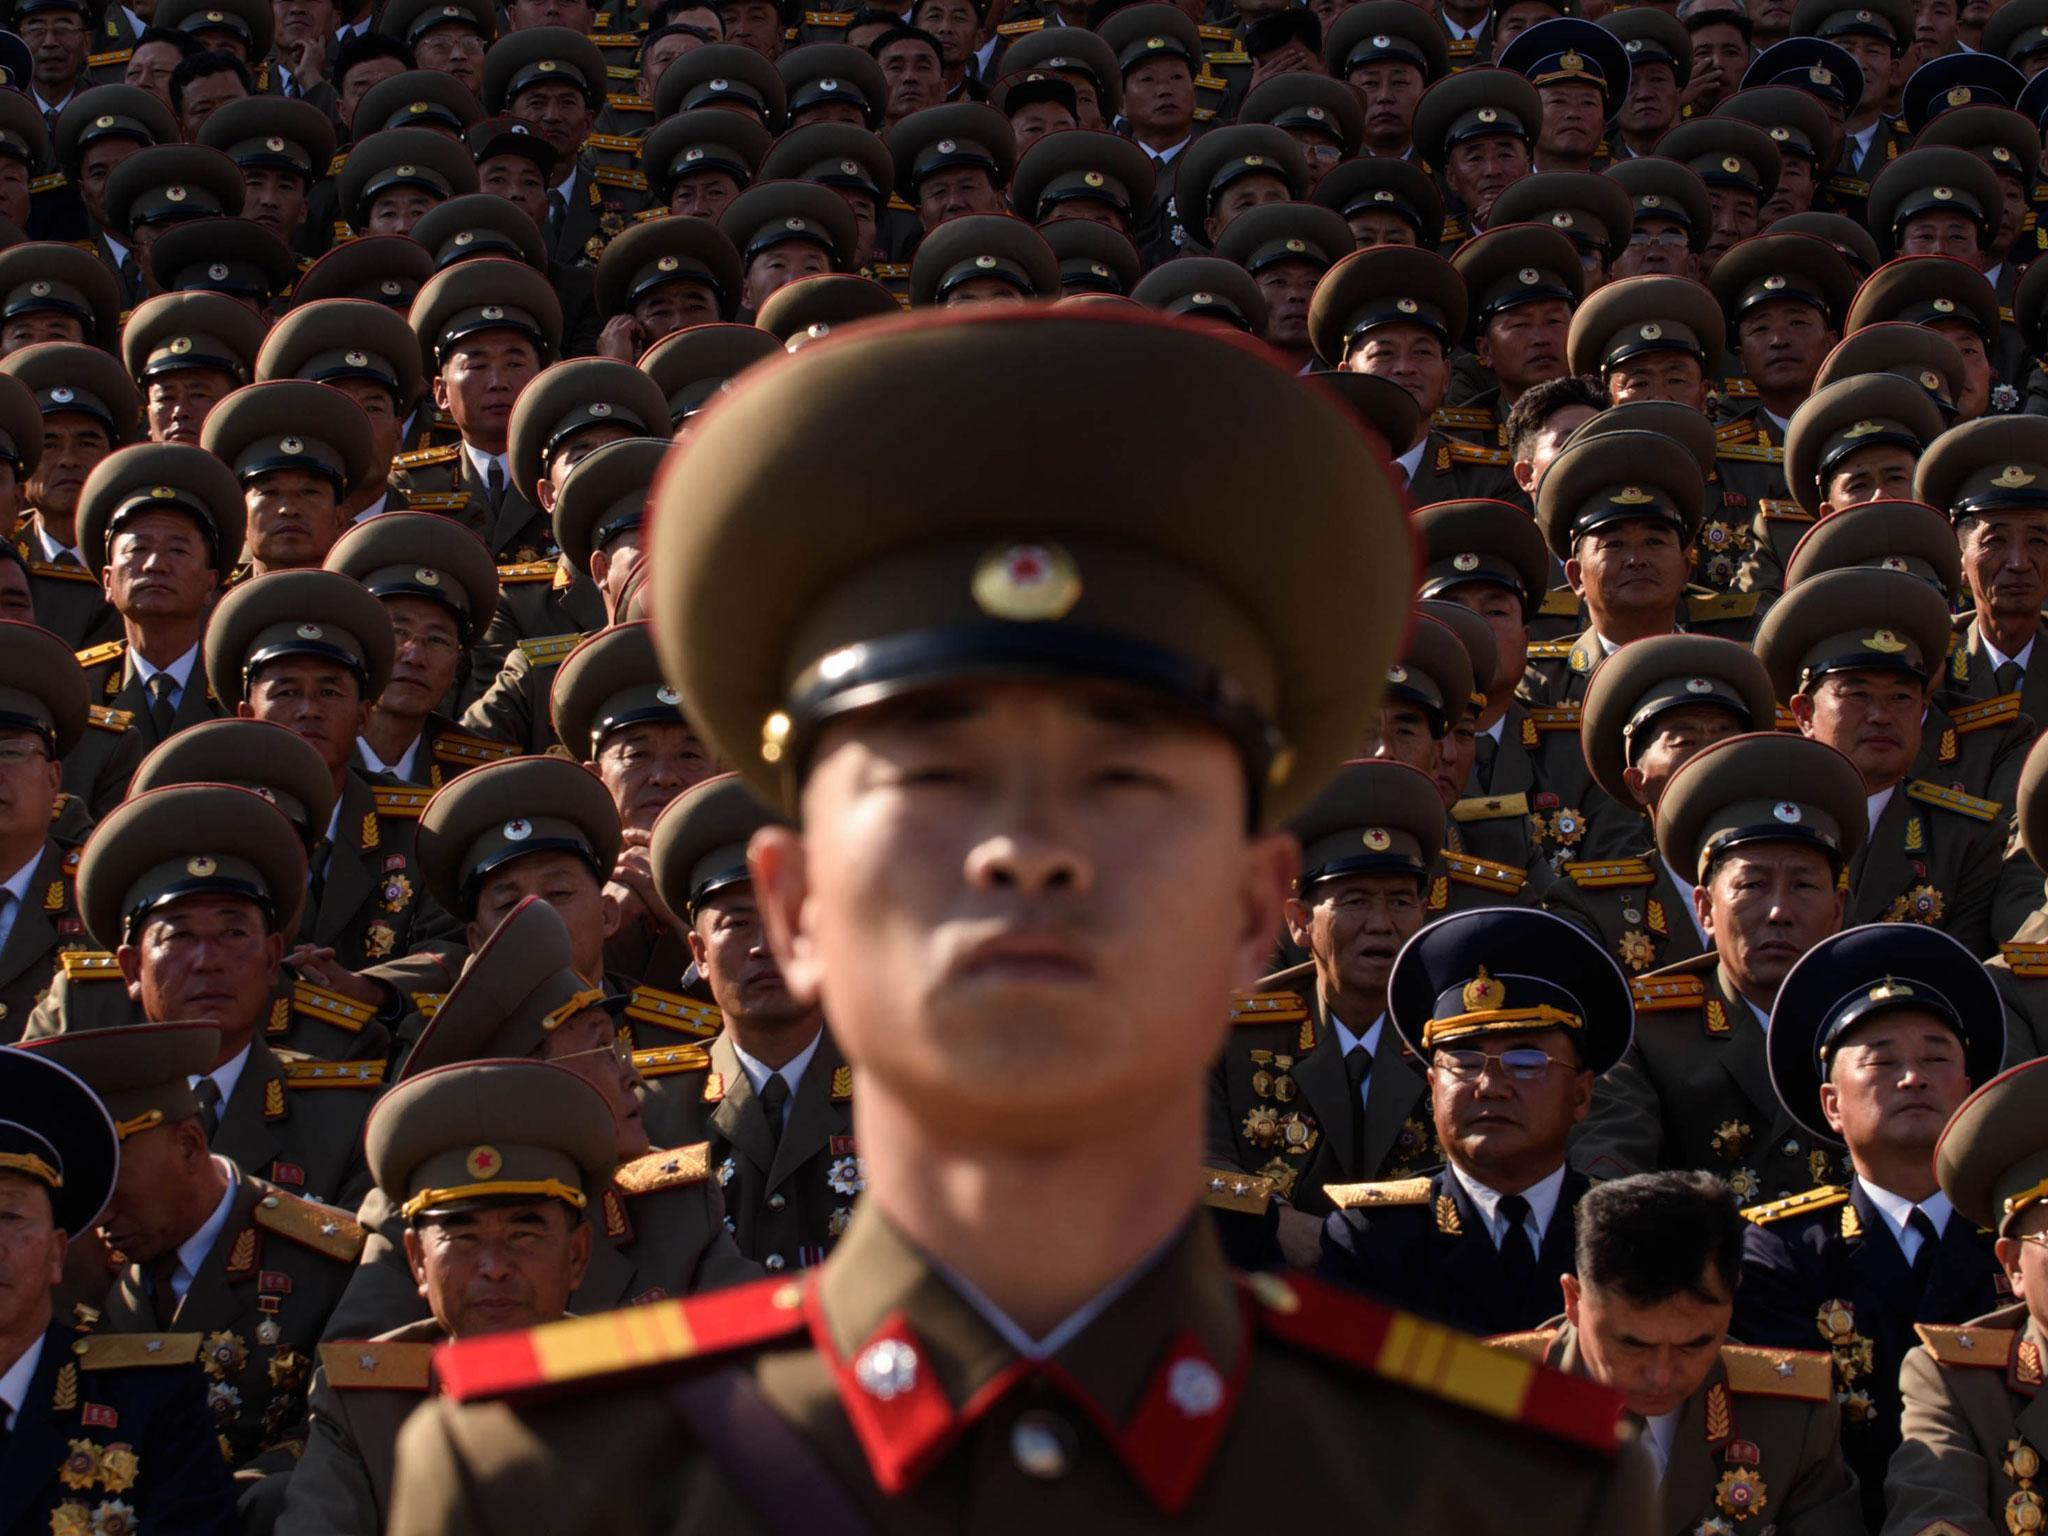 A North Korean soldiers stands before spectators during a mass military parade at Kim Il-Sung square in Pyongyang